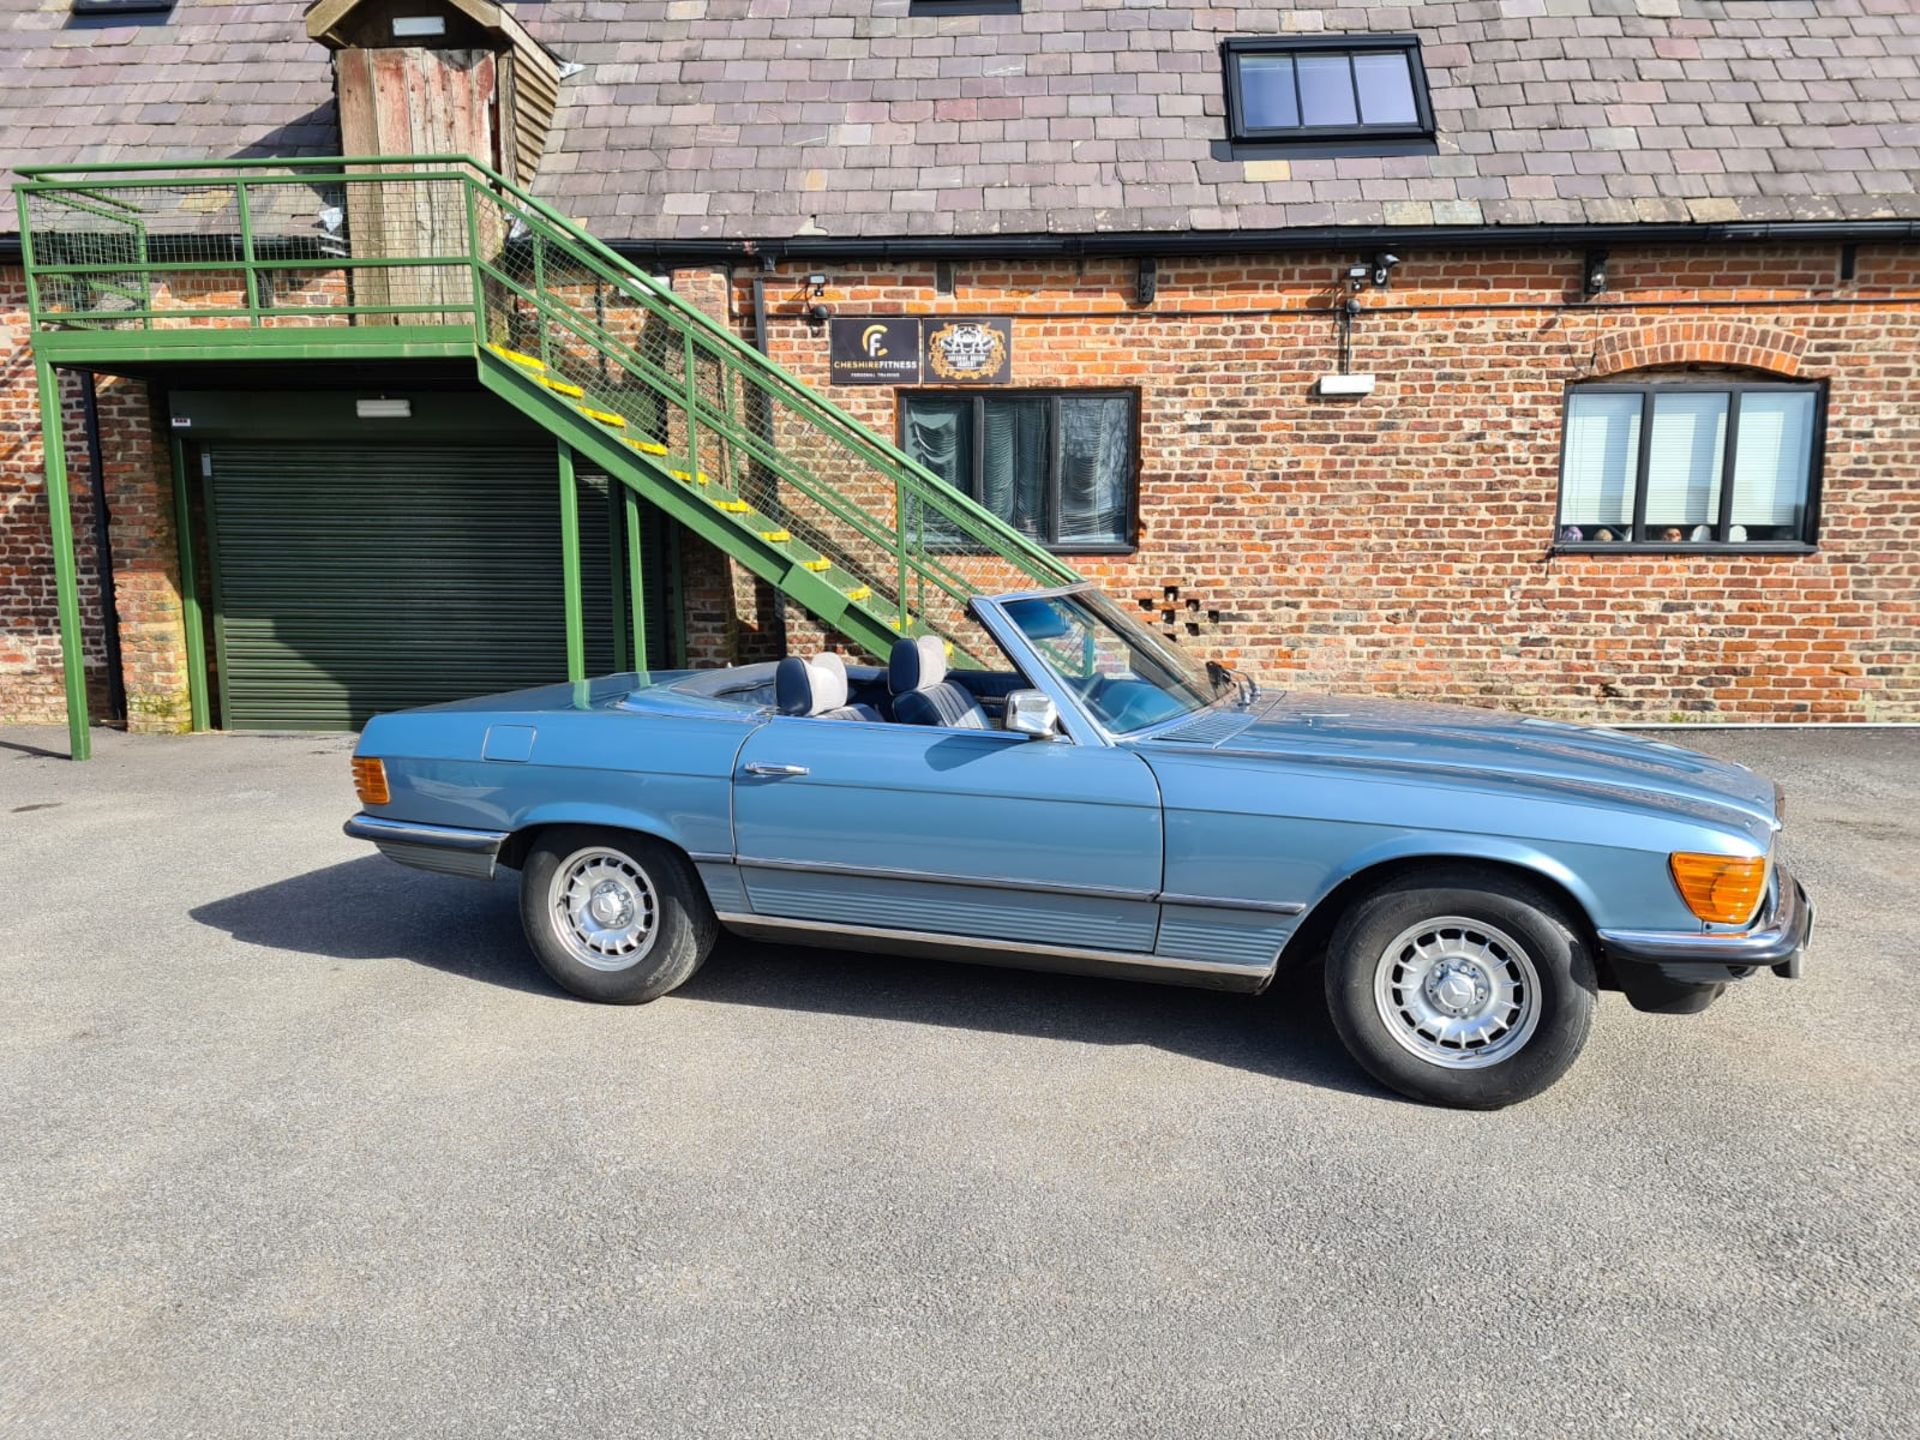 Stunning 1979 Mercedes Benz SL350 V8 With Factory Hardtop - Restored in 2018 - Image 4 of 22